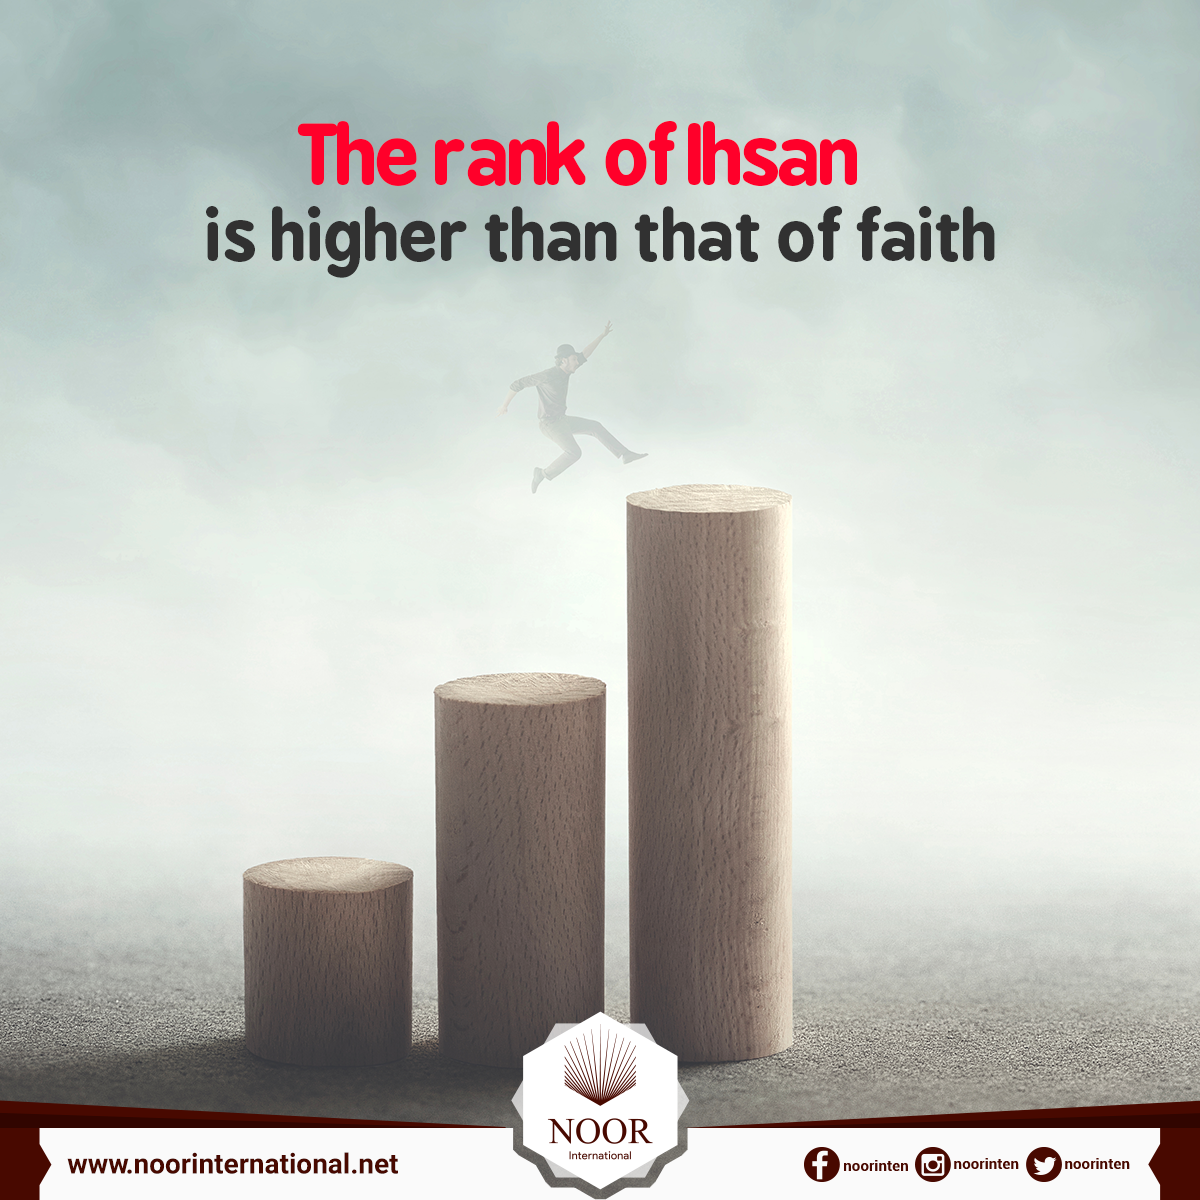 The rank of Ihsan is higher than that of faith